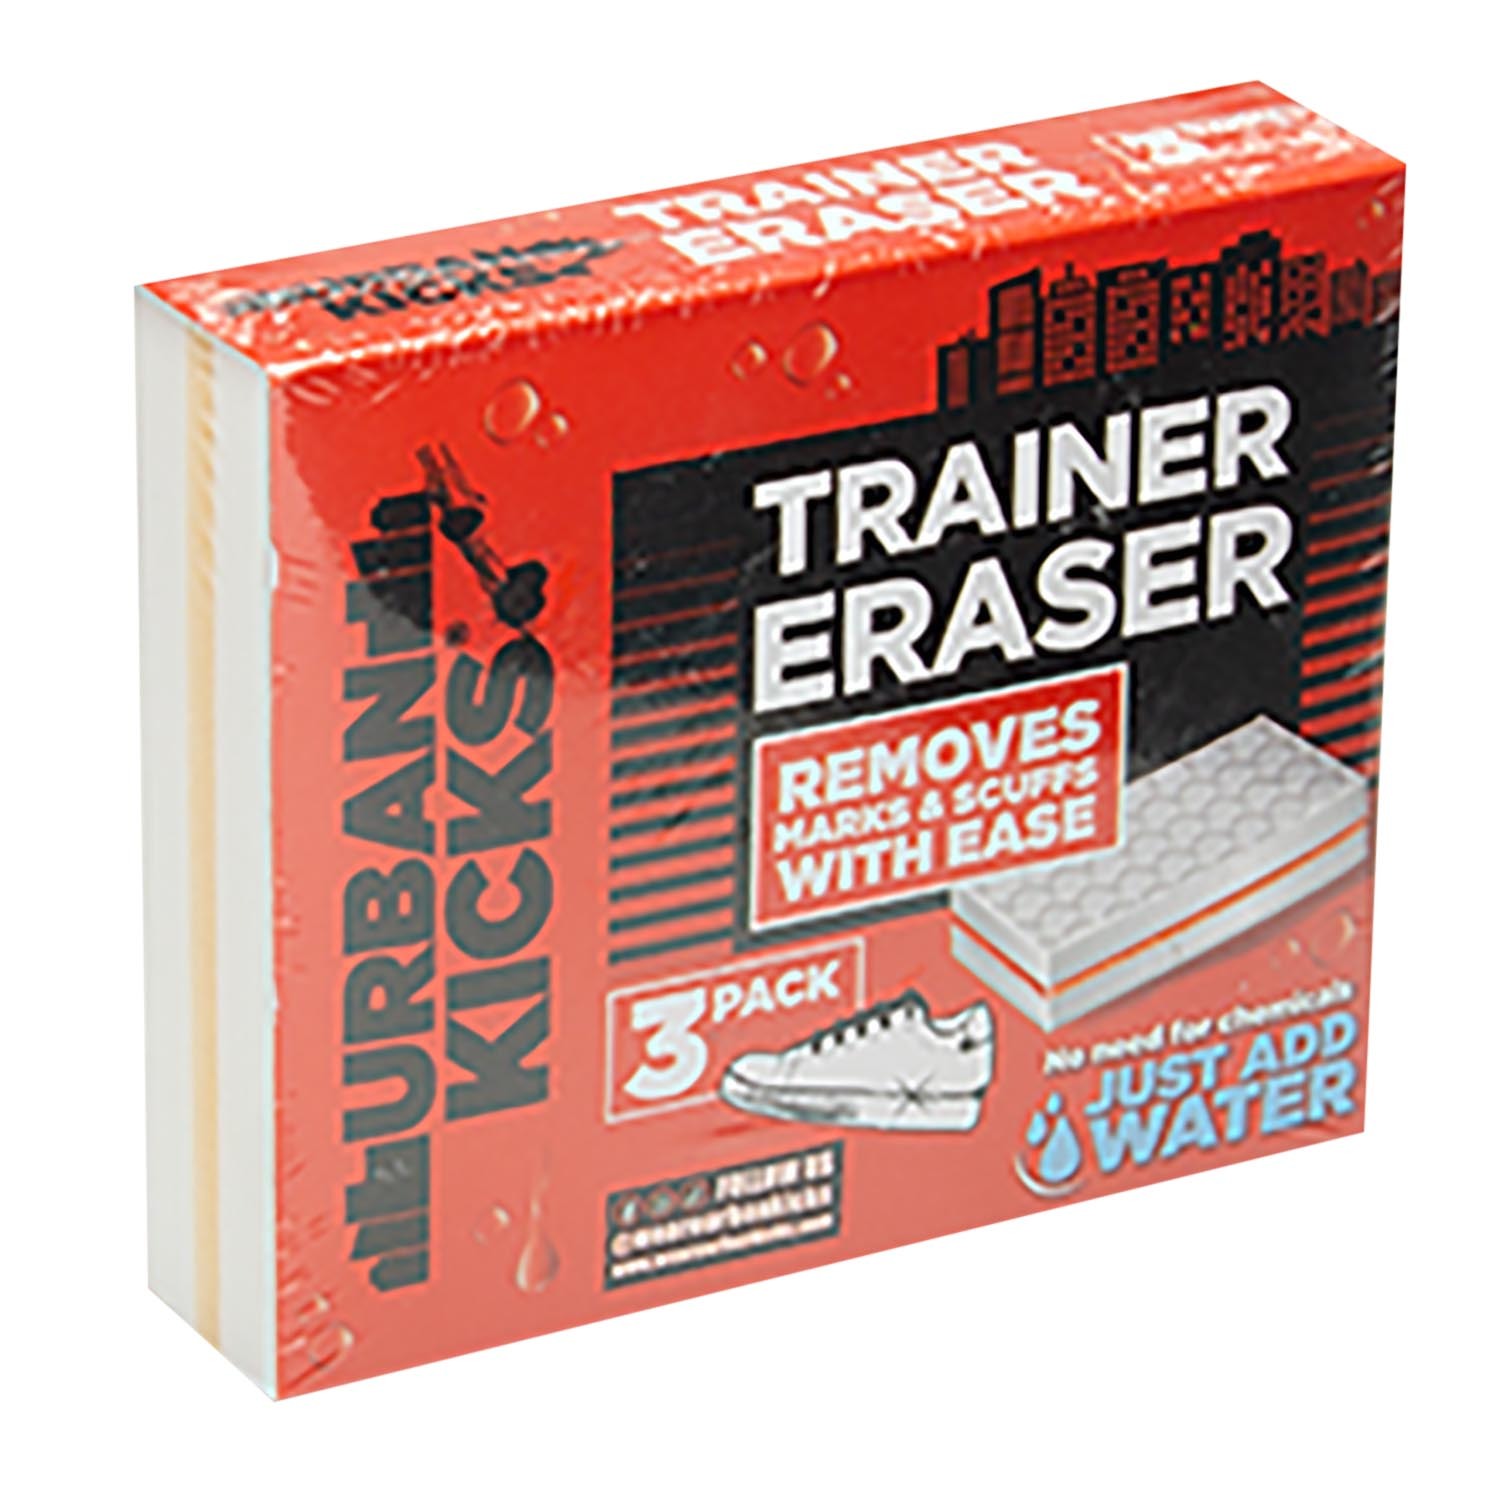 Pack of 3 Trainer Erasers Image